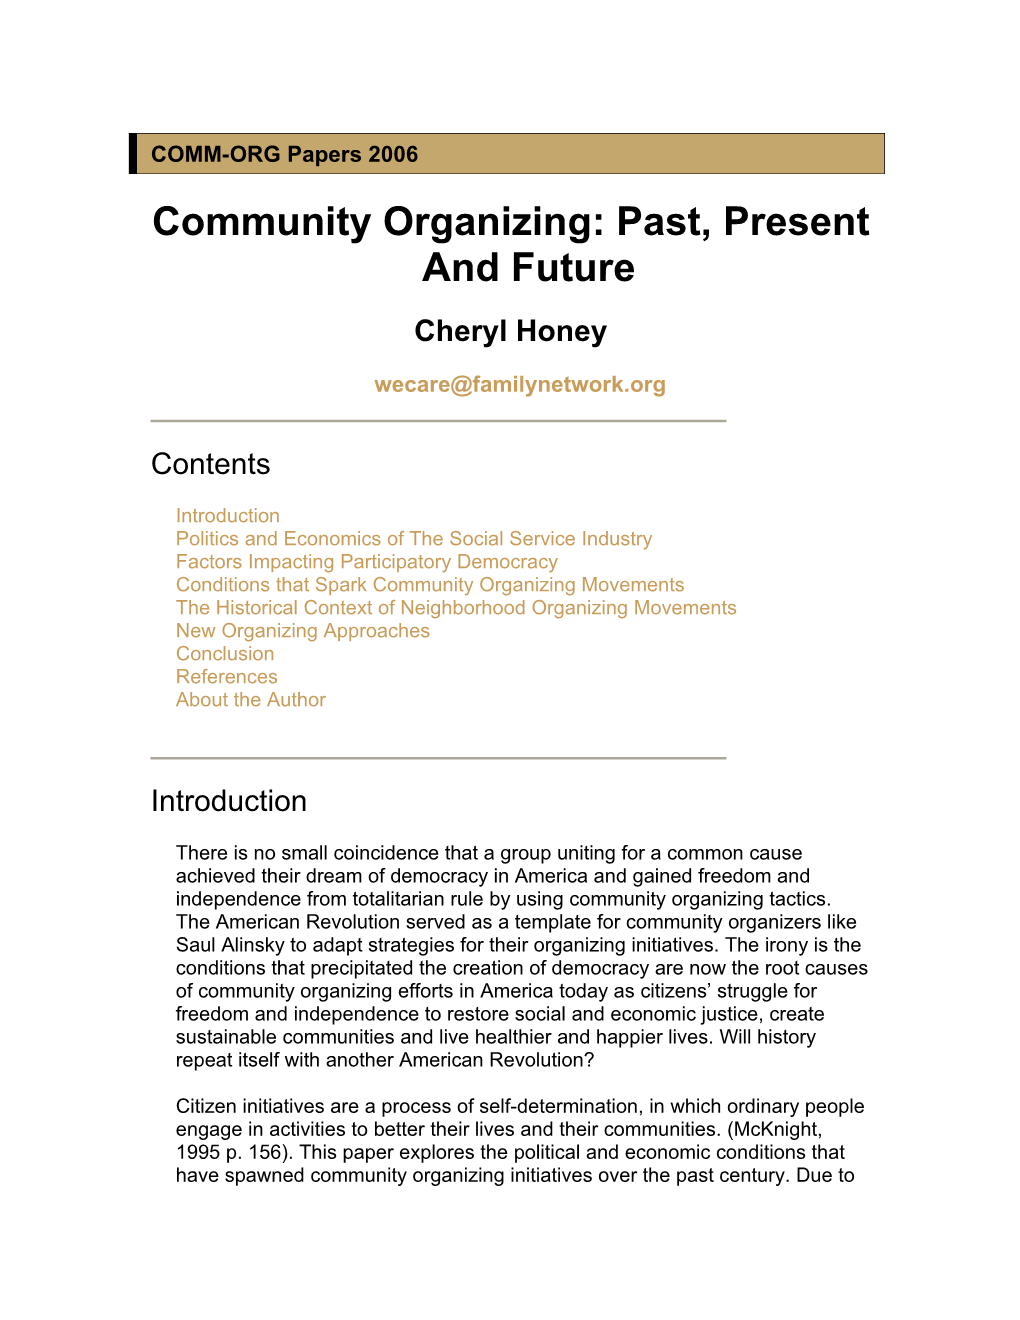 COMM-ORG Papers 2006 Community Organizing: Past, Present and Future Cheryl Honey